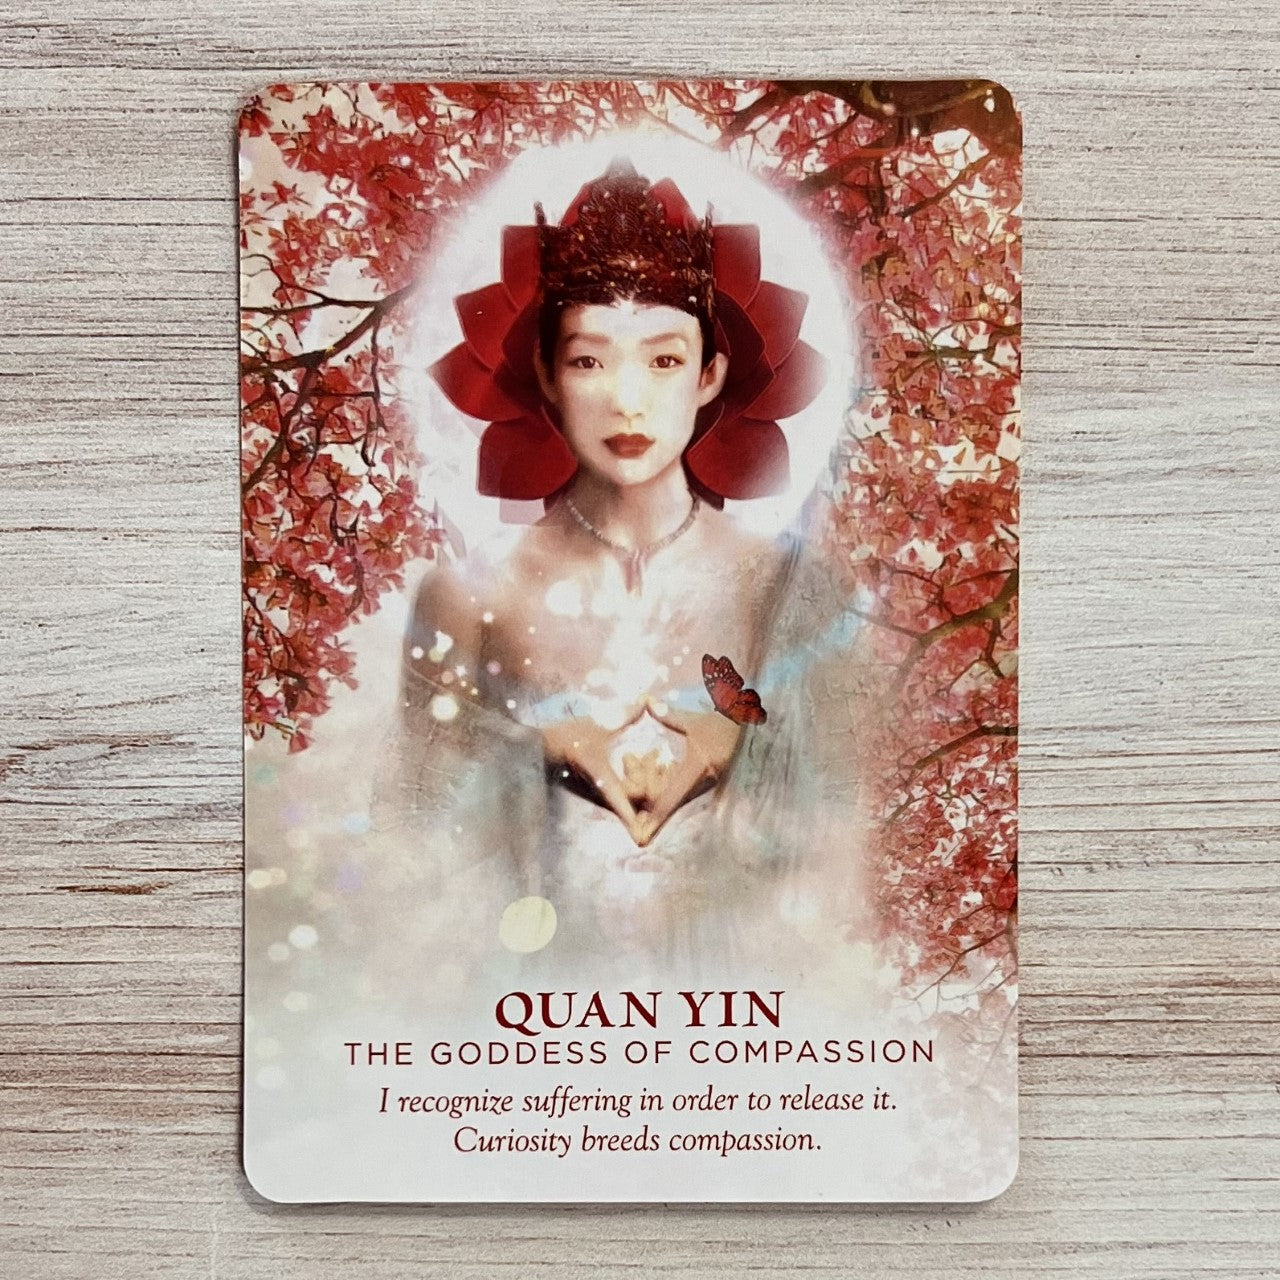 The Divine Feminine Oracle: A 53-Card Deck & Guidebook for Embodying Love by Meggan Watterson